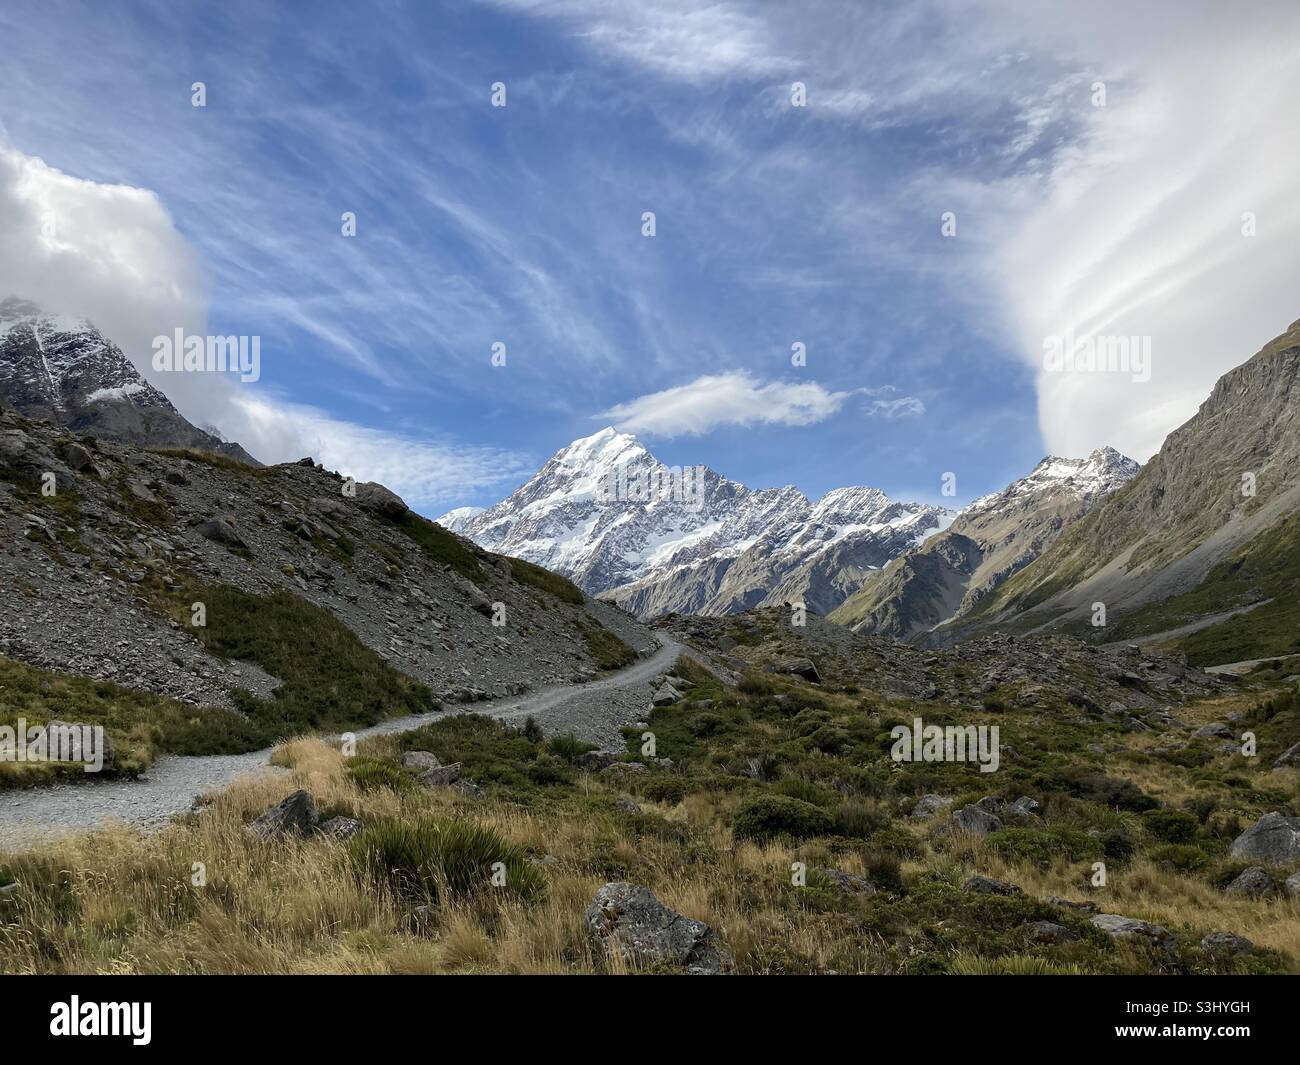 Mt Cook, New Zealand in the Rocky Landscape of Hooker Valley with a Cloudy Blue Sky Stock Photo